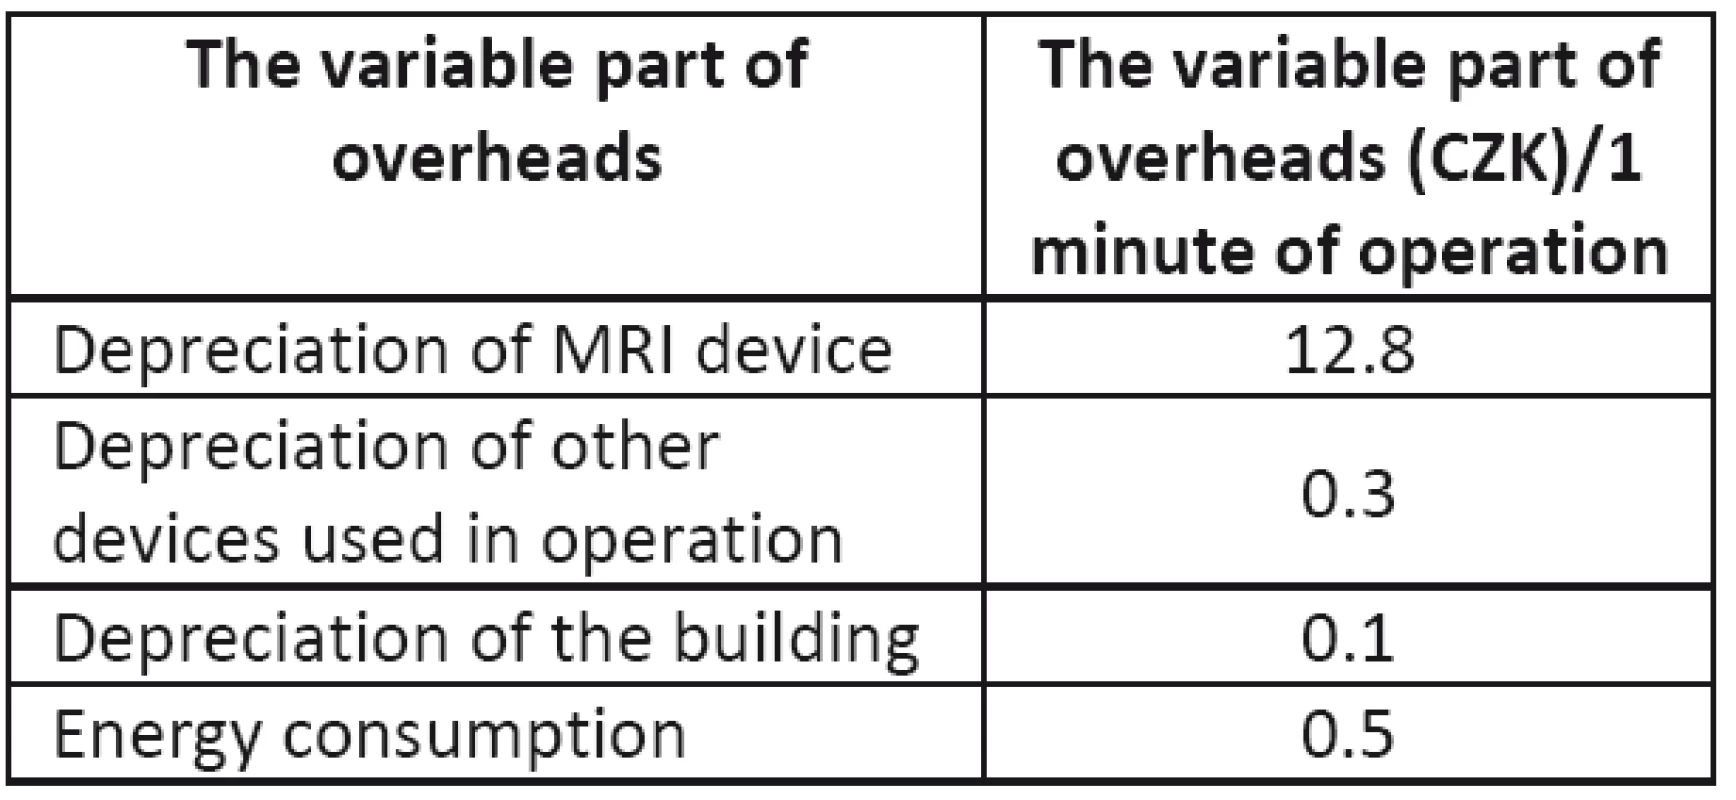 Overhead costs per minute of operation